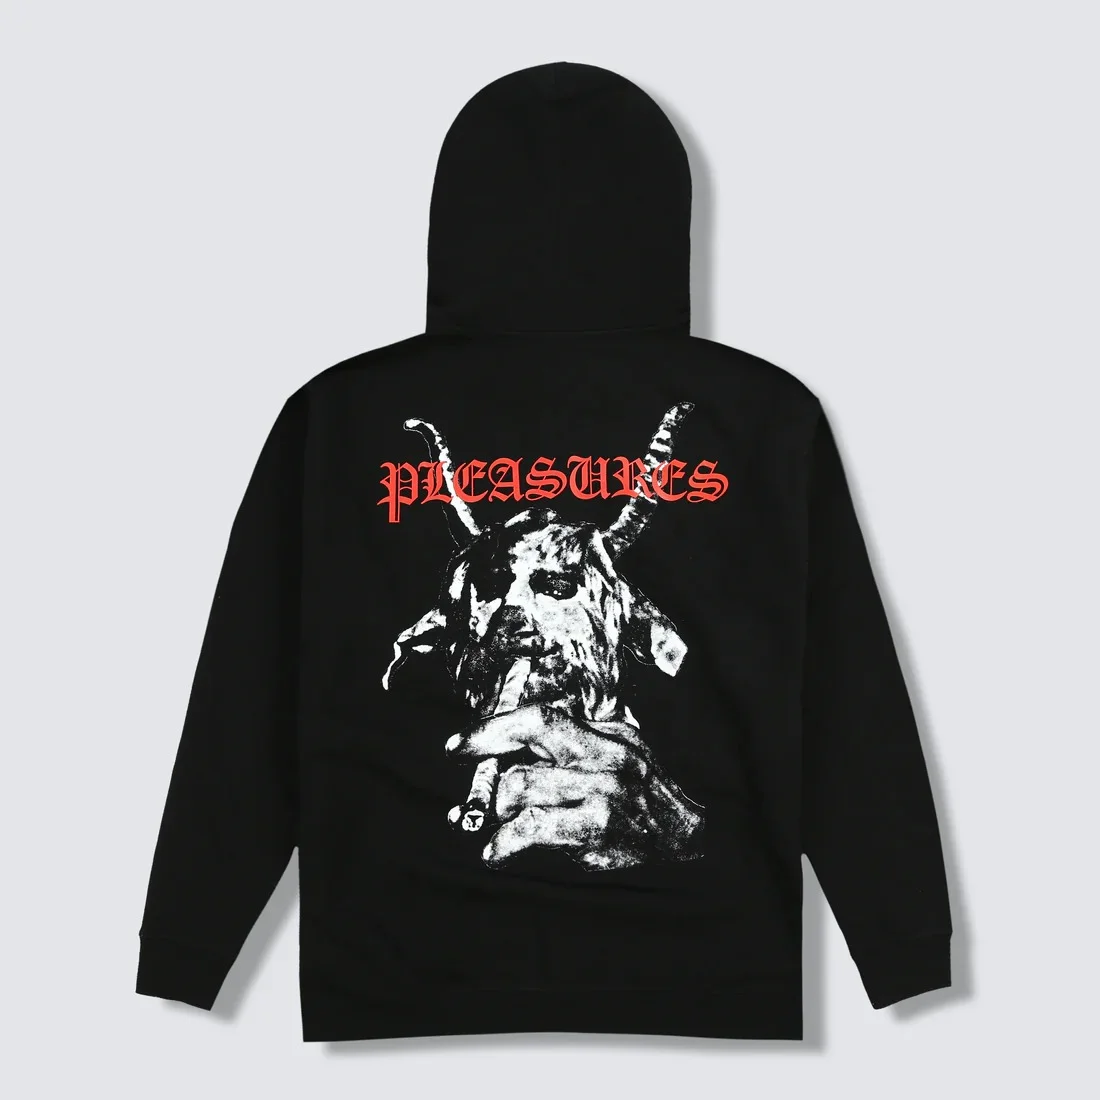 Discover the Features of Pleasures Brand Hoodies